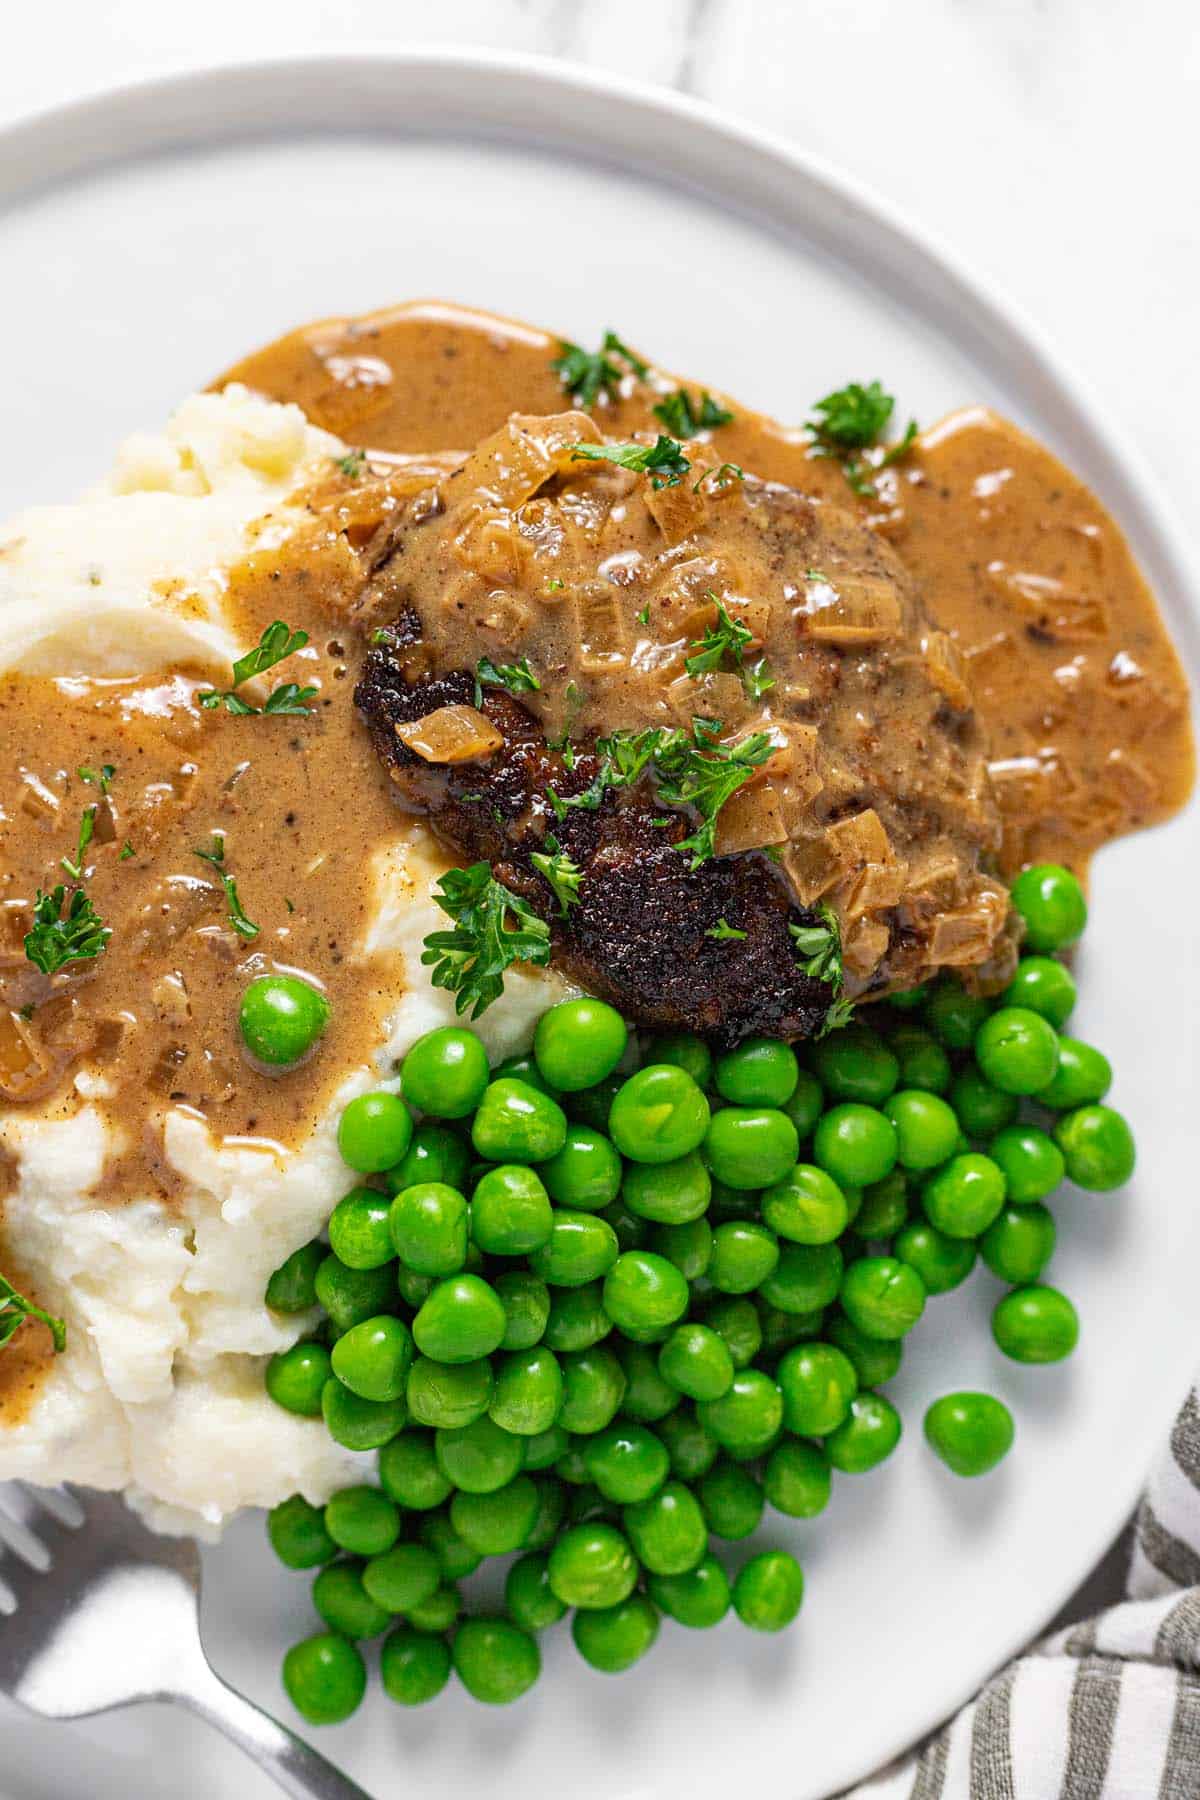 Large plate filled with mashed potatoes, peas, and a homemade hamburger steak topped with onion gravy. 